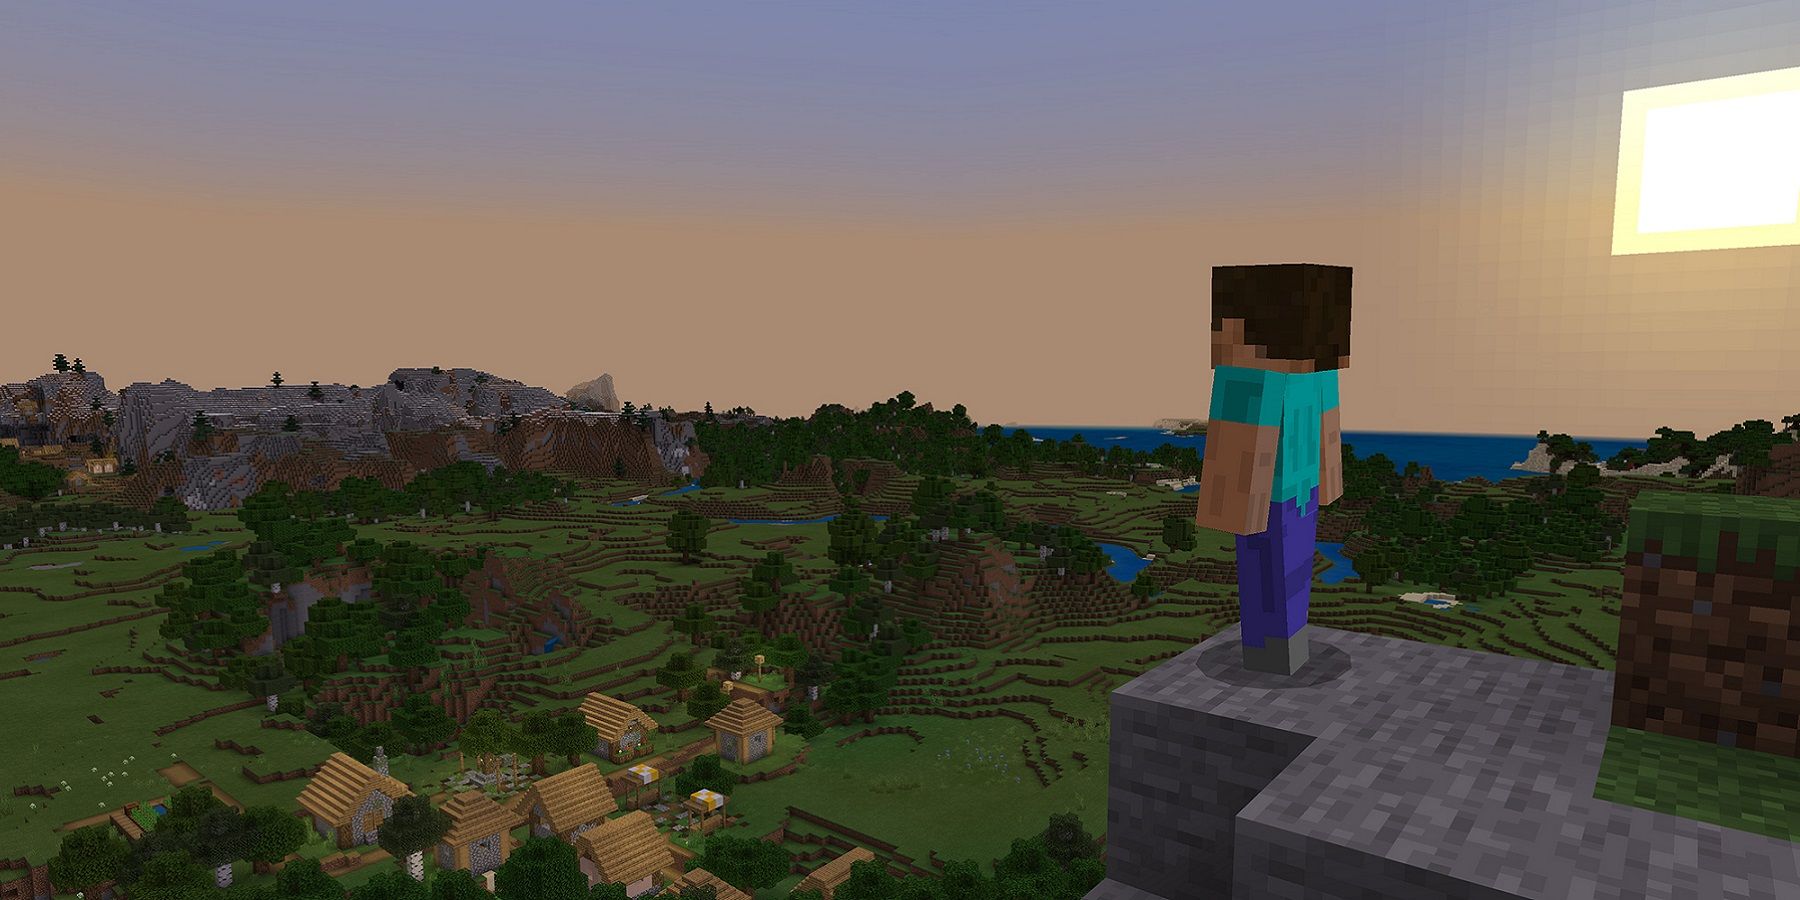 Image from Minecraft showing Minecraft Steve looking out into the horizon.